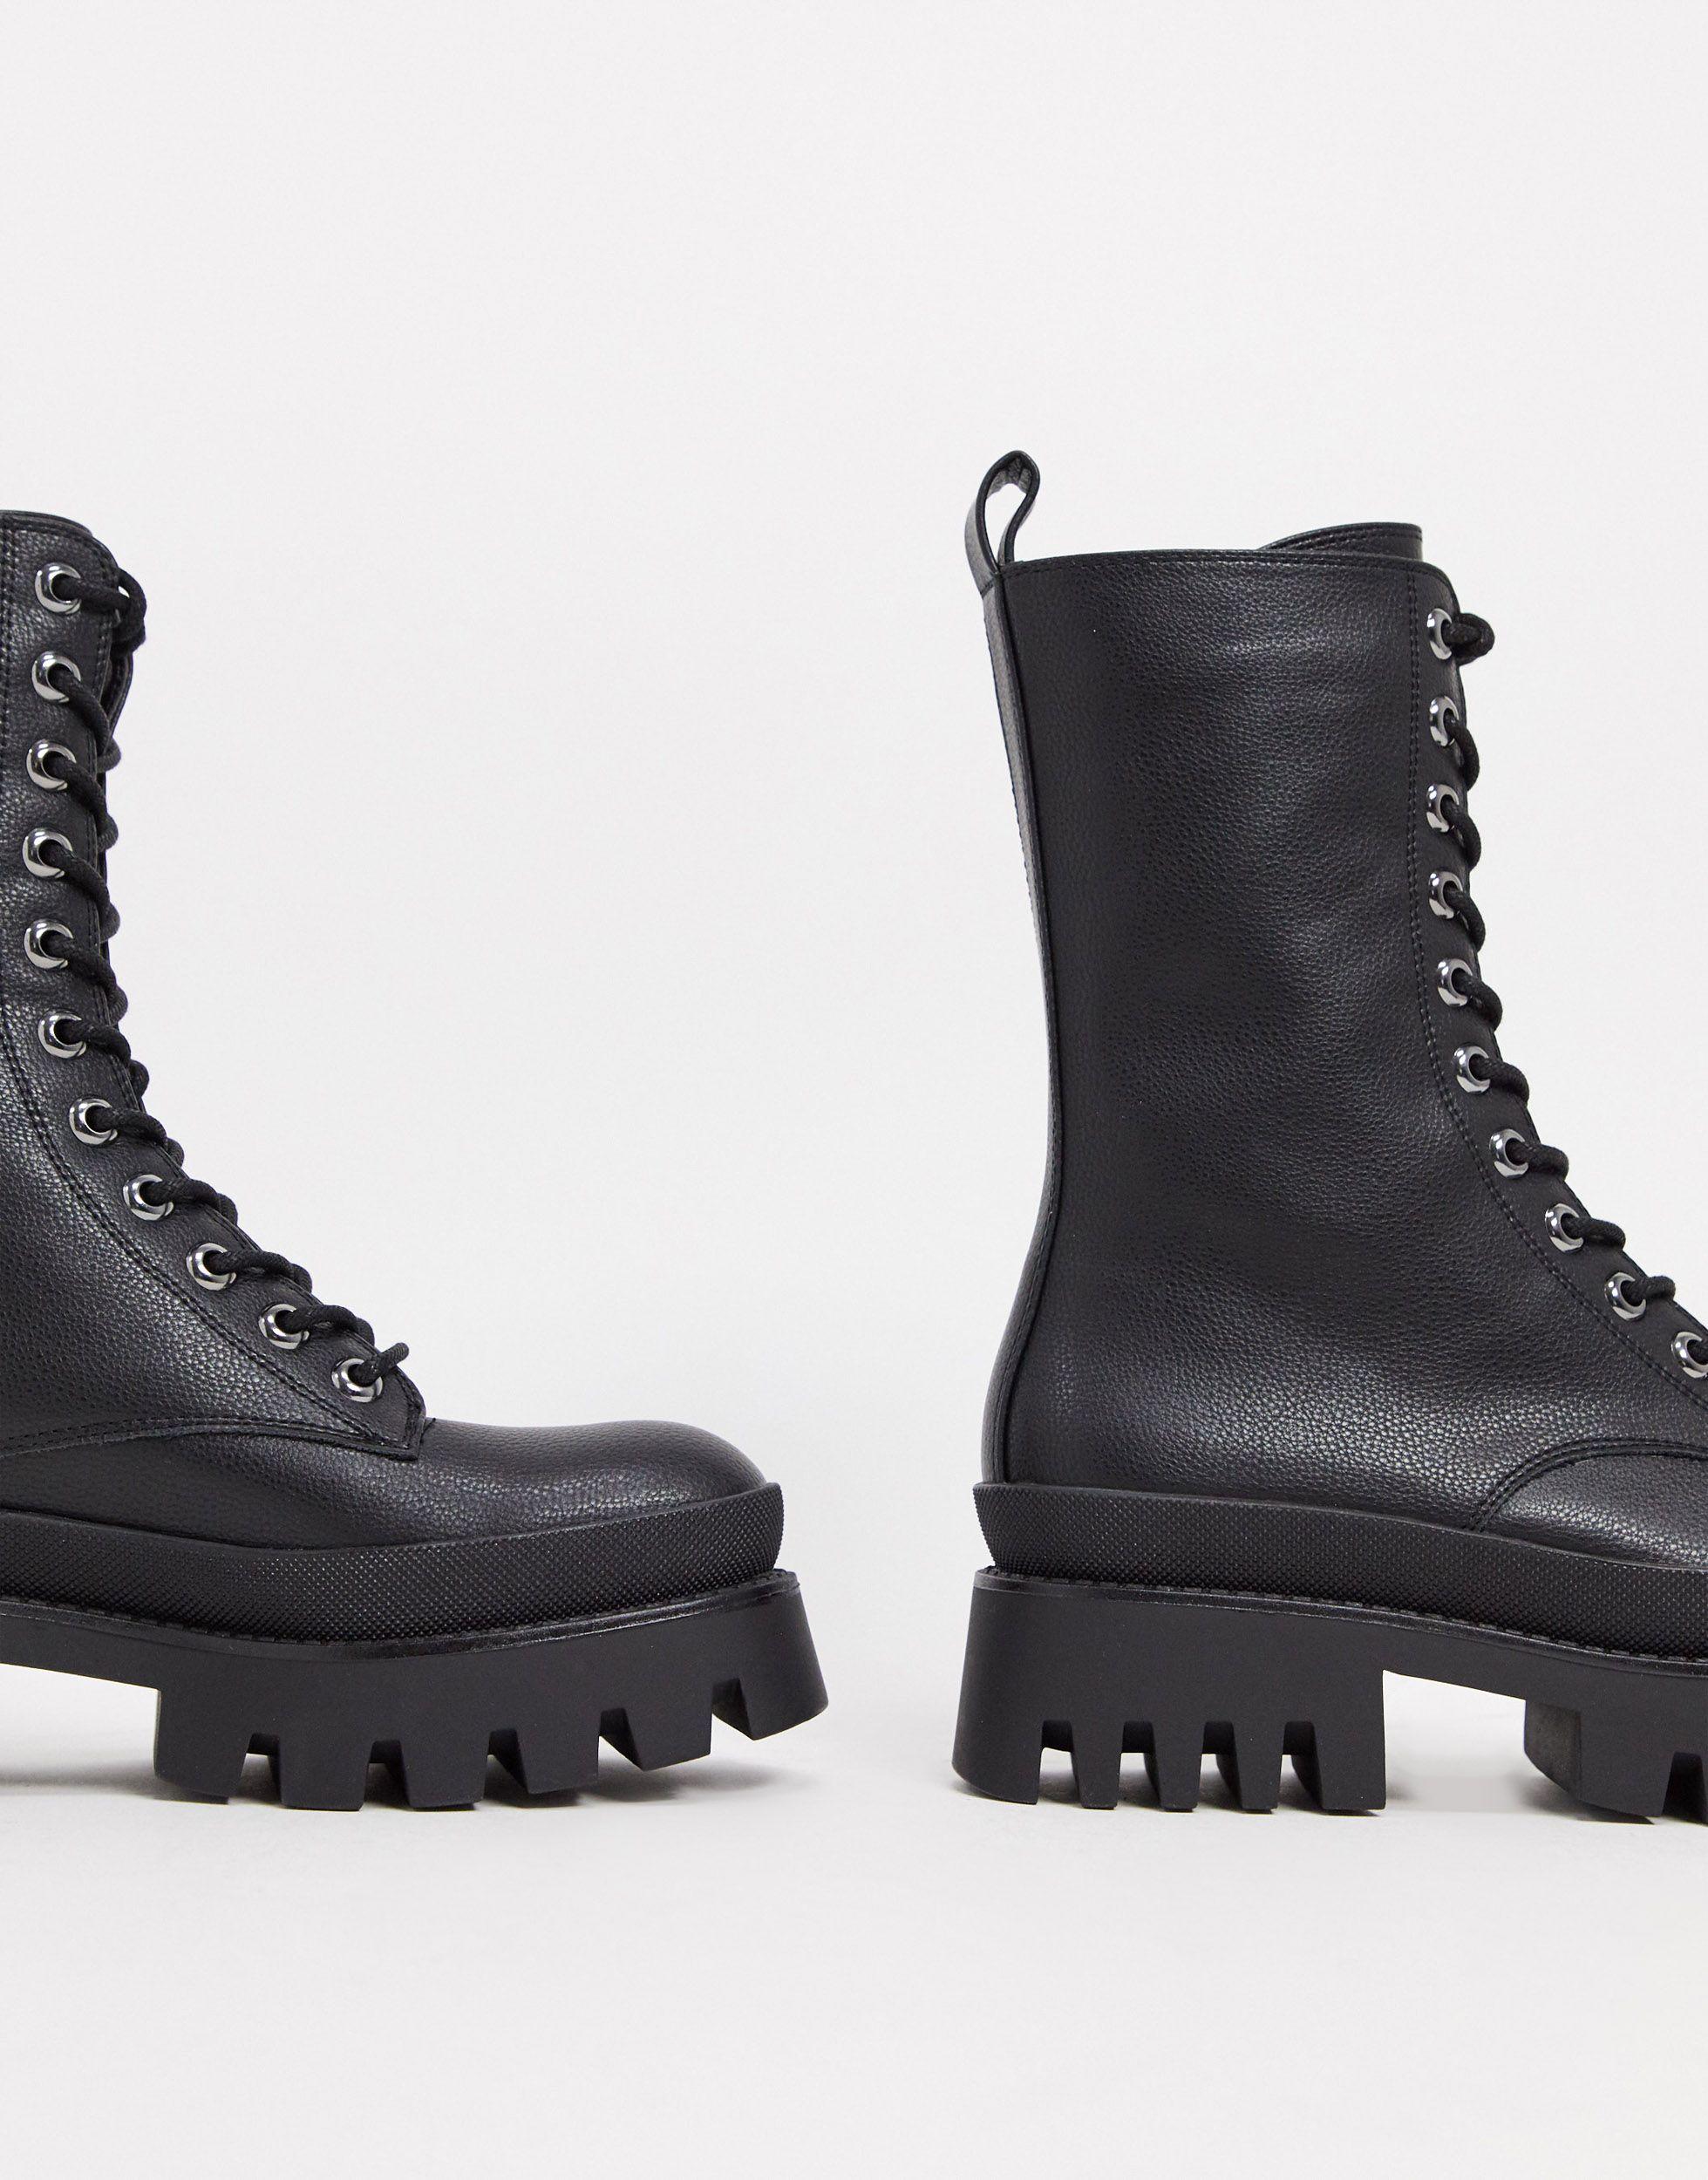 Bershka Lace Up Biker Boot With Sole Detail in Black | Lyst